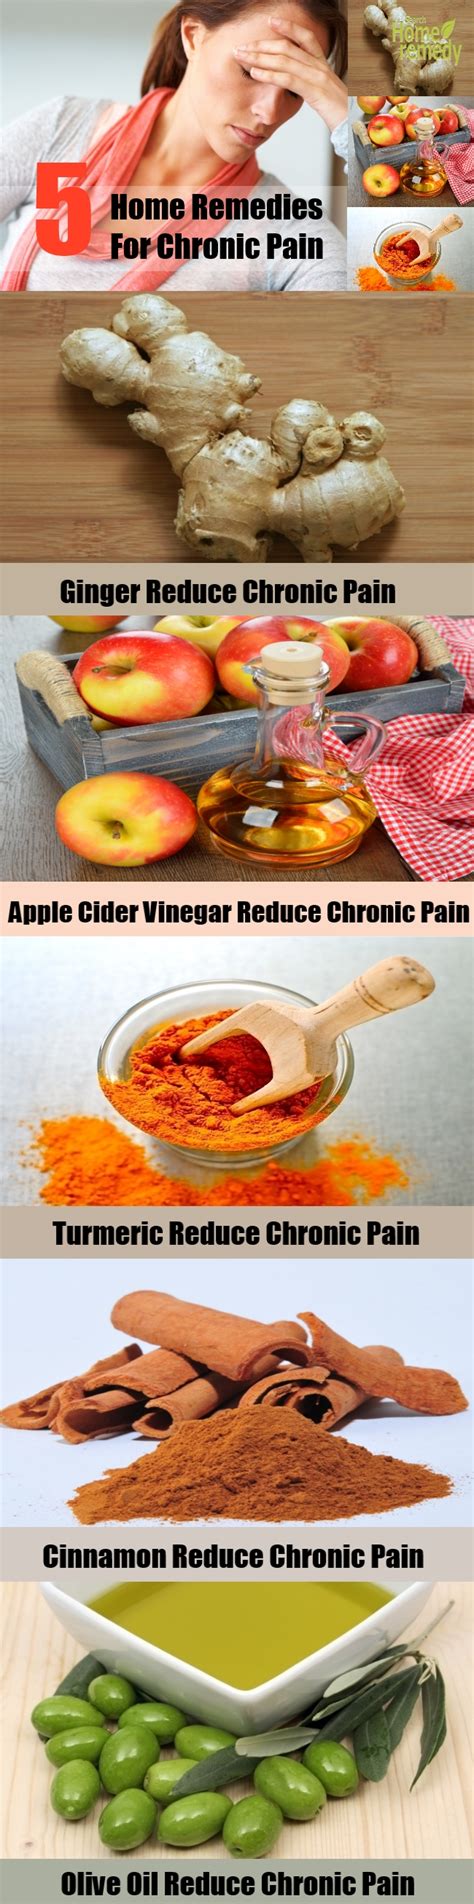 5 Chronic Pain Home Remedies Treatments And Cures Search Home Remedy